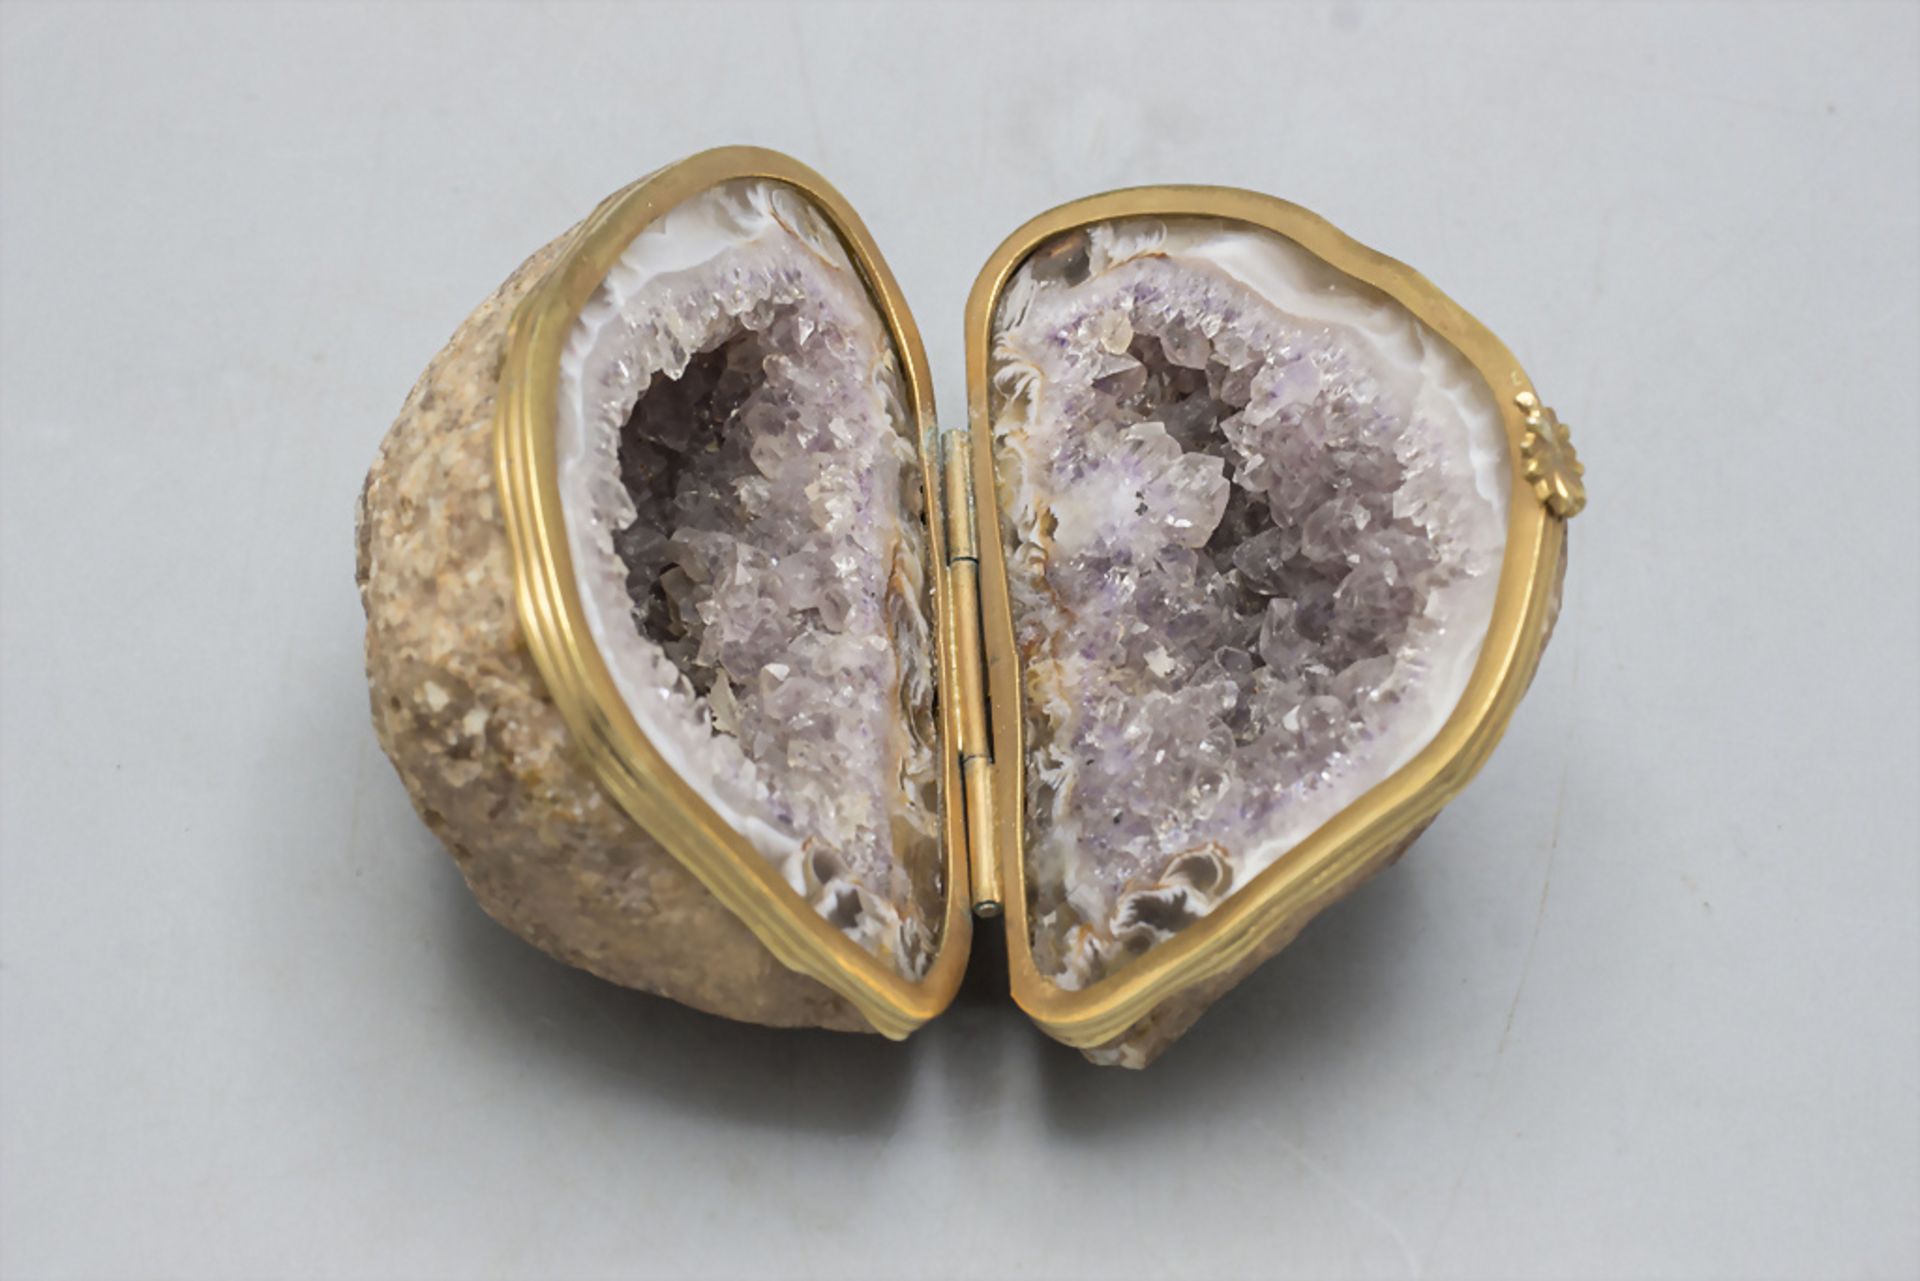 Aufklappbare Amethyst-Druse / An amethyst druse with goldplated mount and hinge - Image 2 of 4